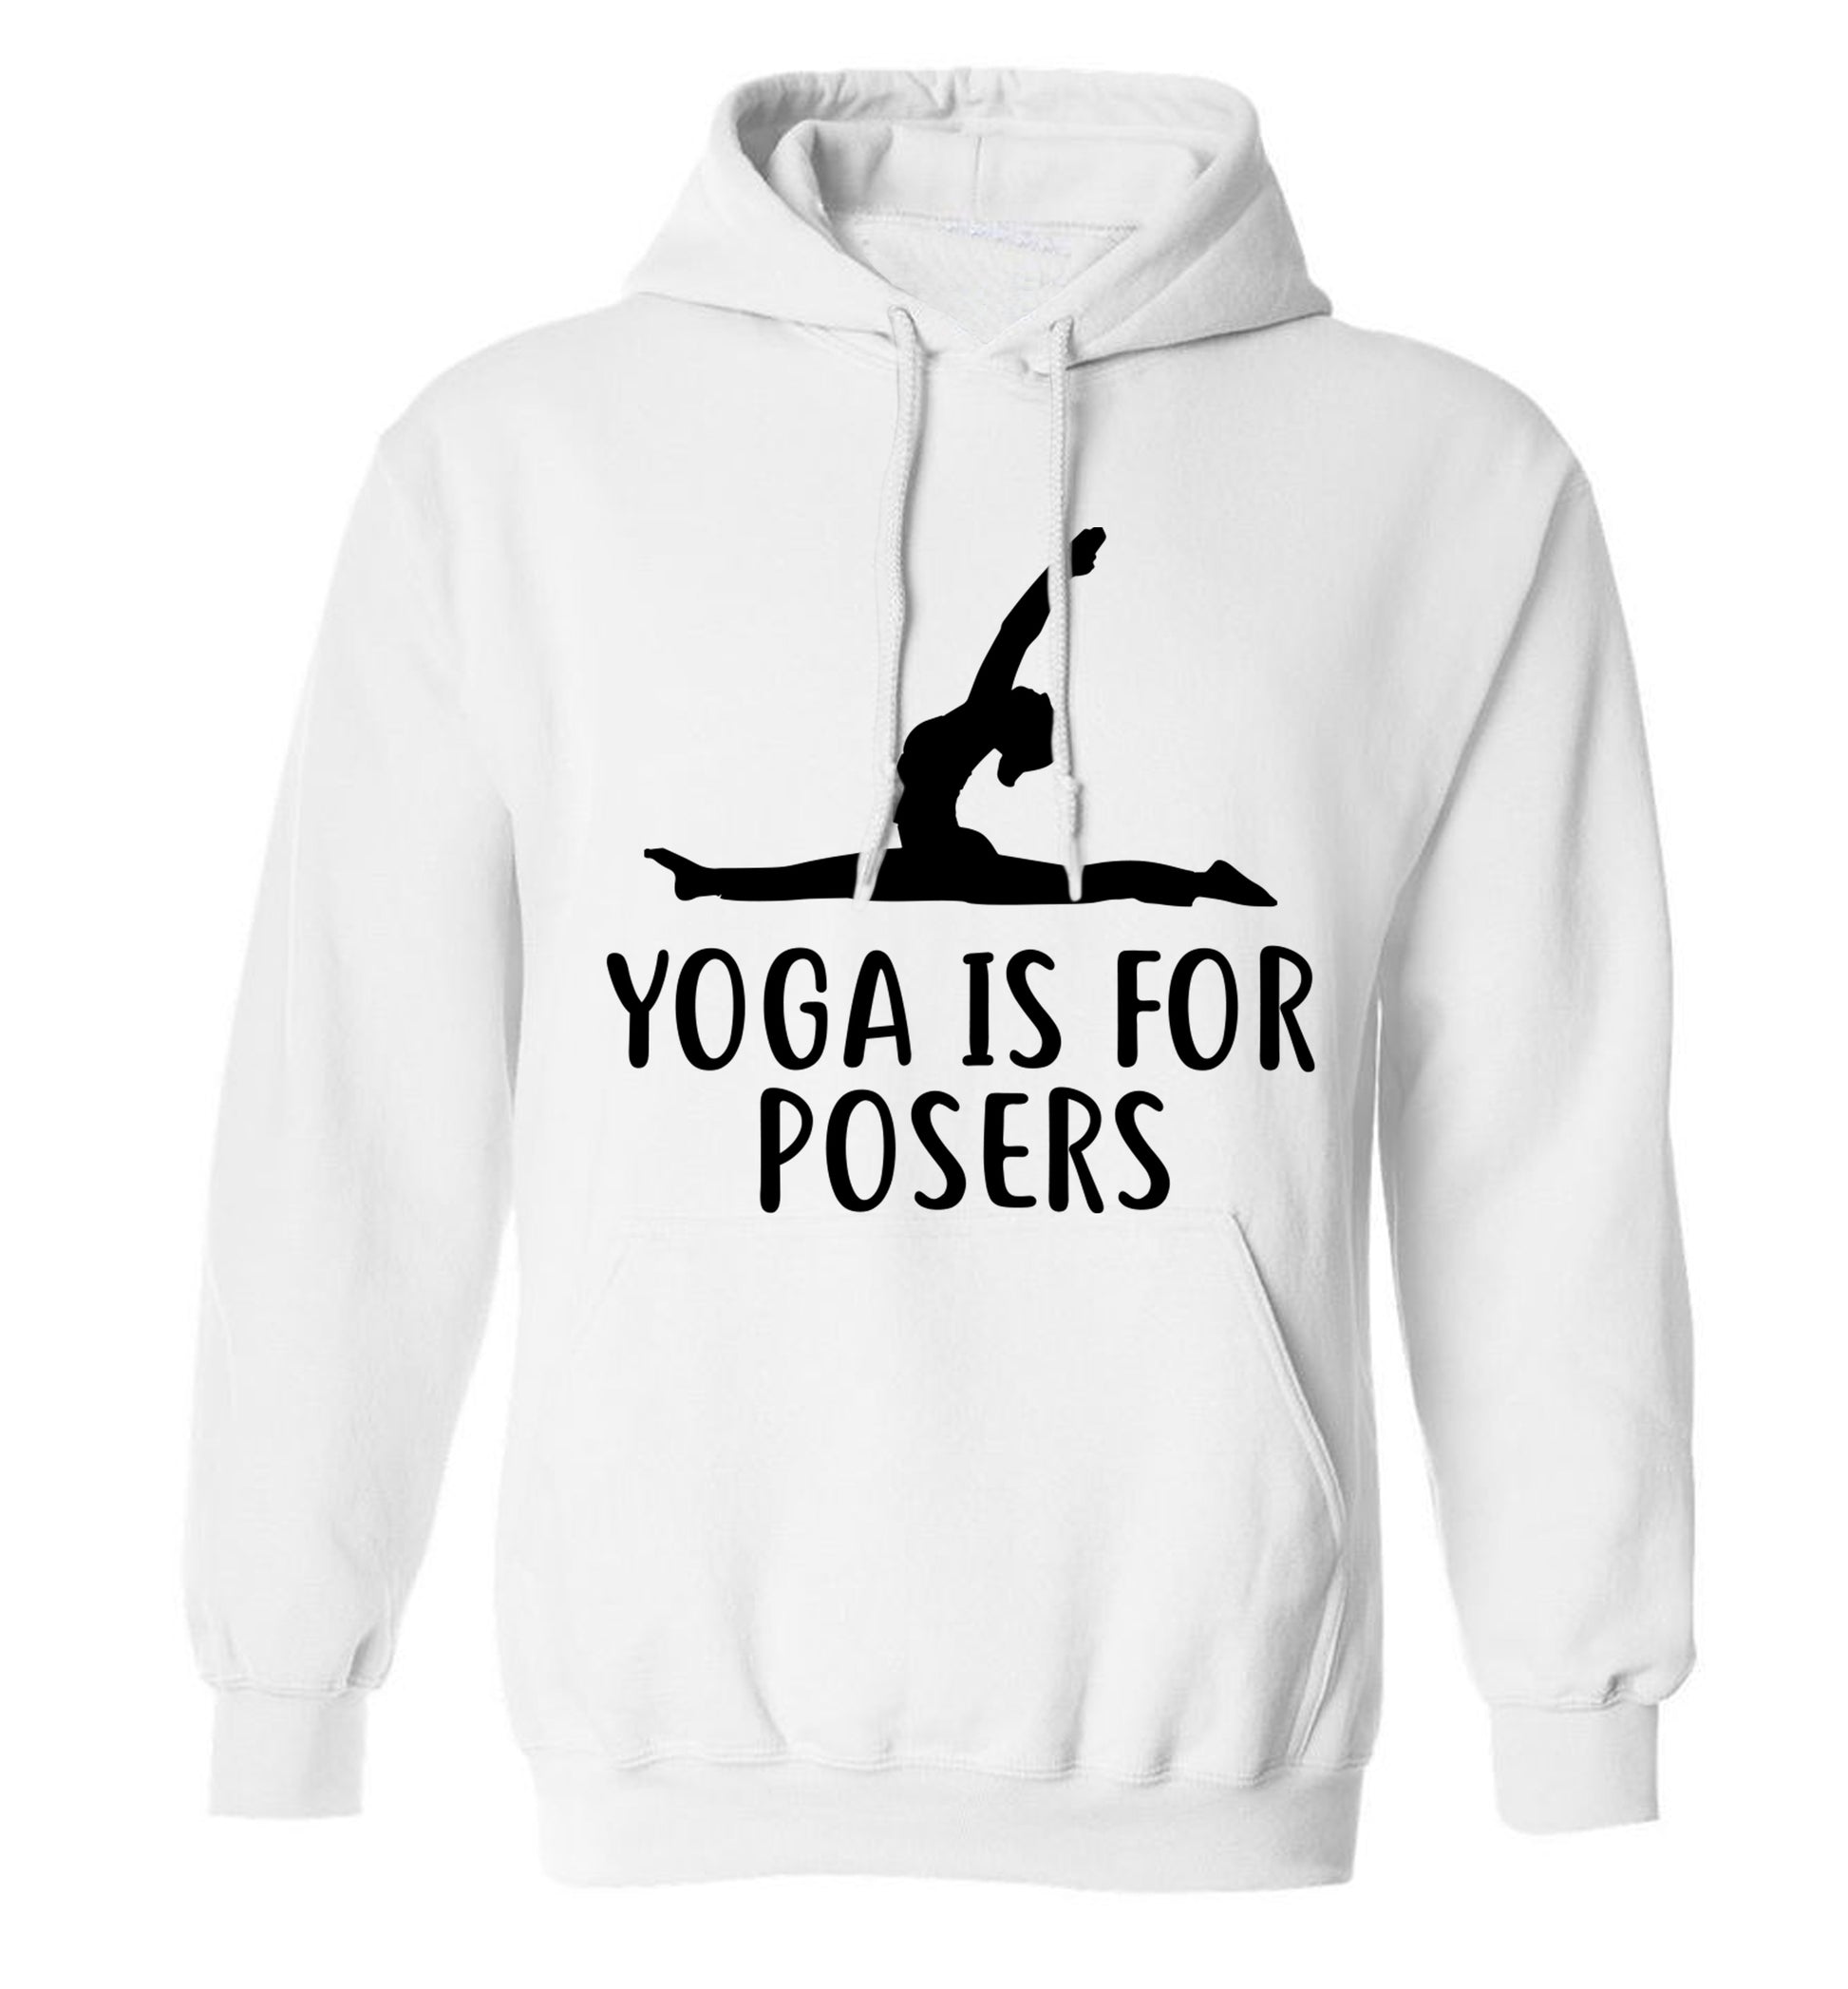 Yoga is for posers adults unisex white hoodie 2XL